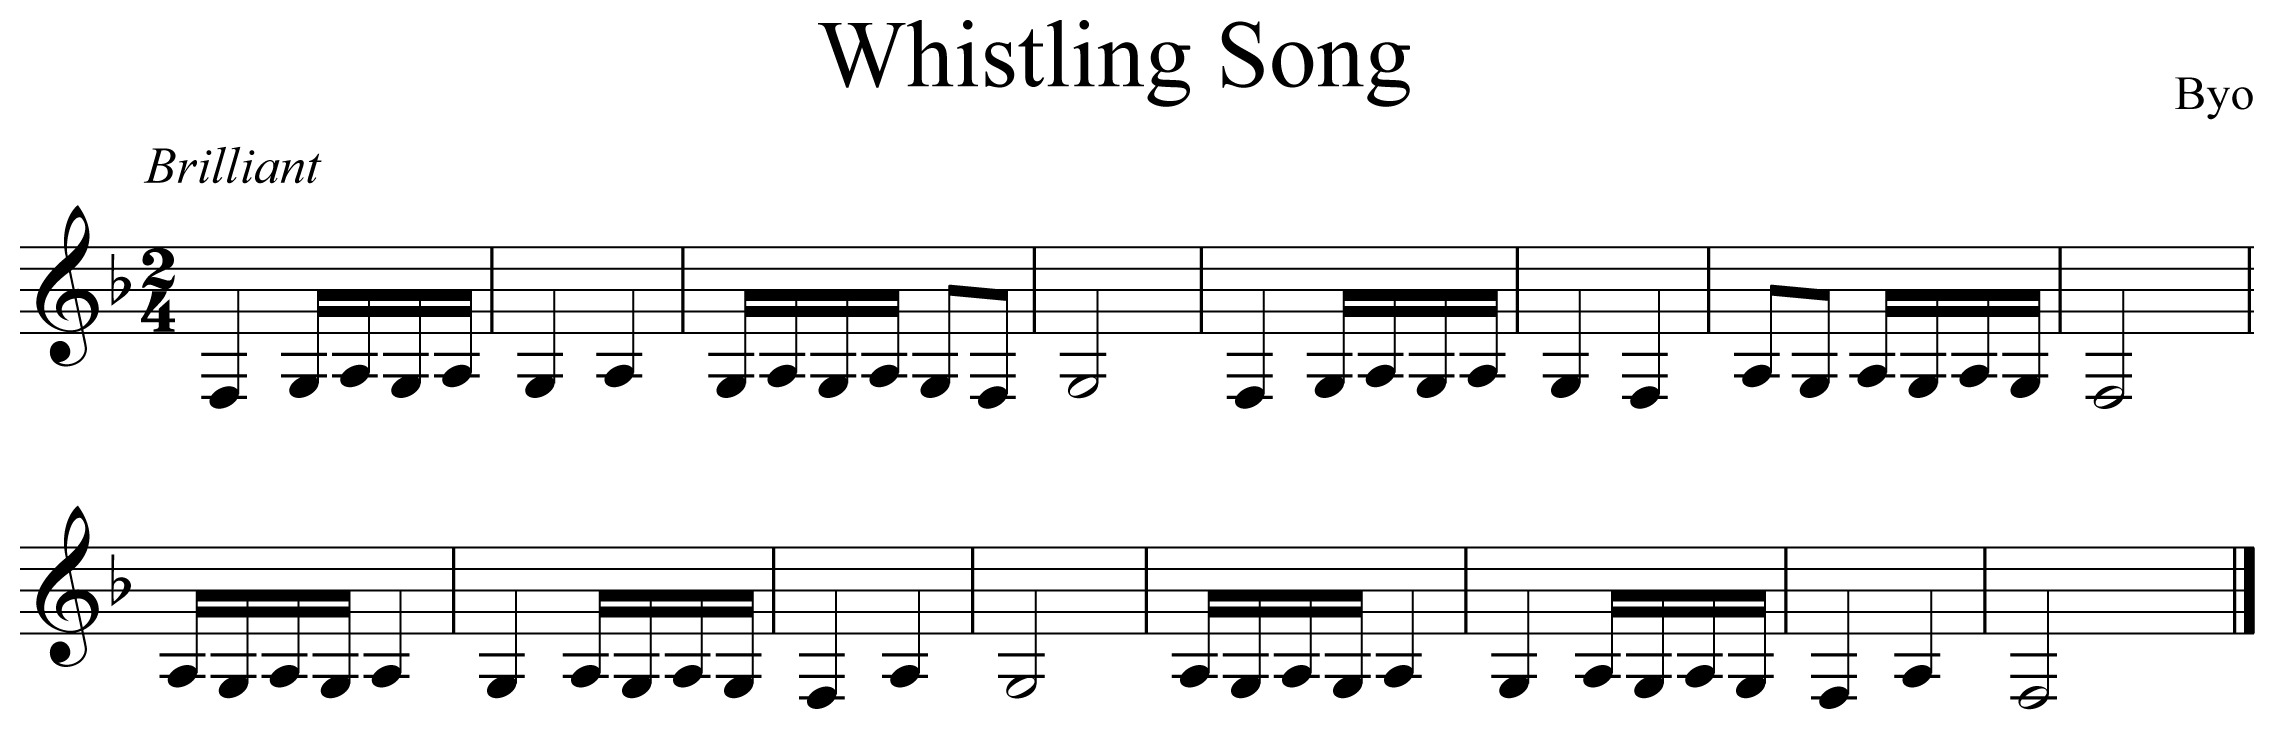 Whistling Song Music Notation Clarinet